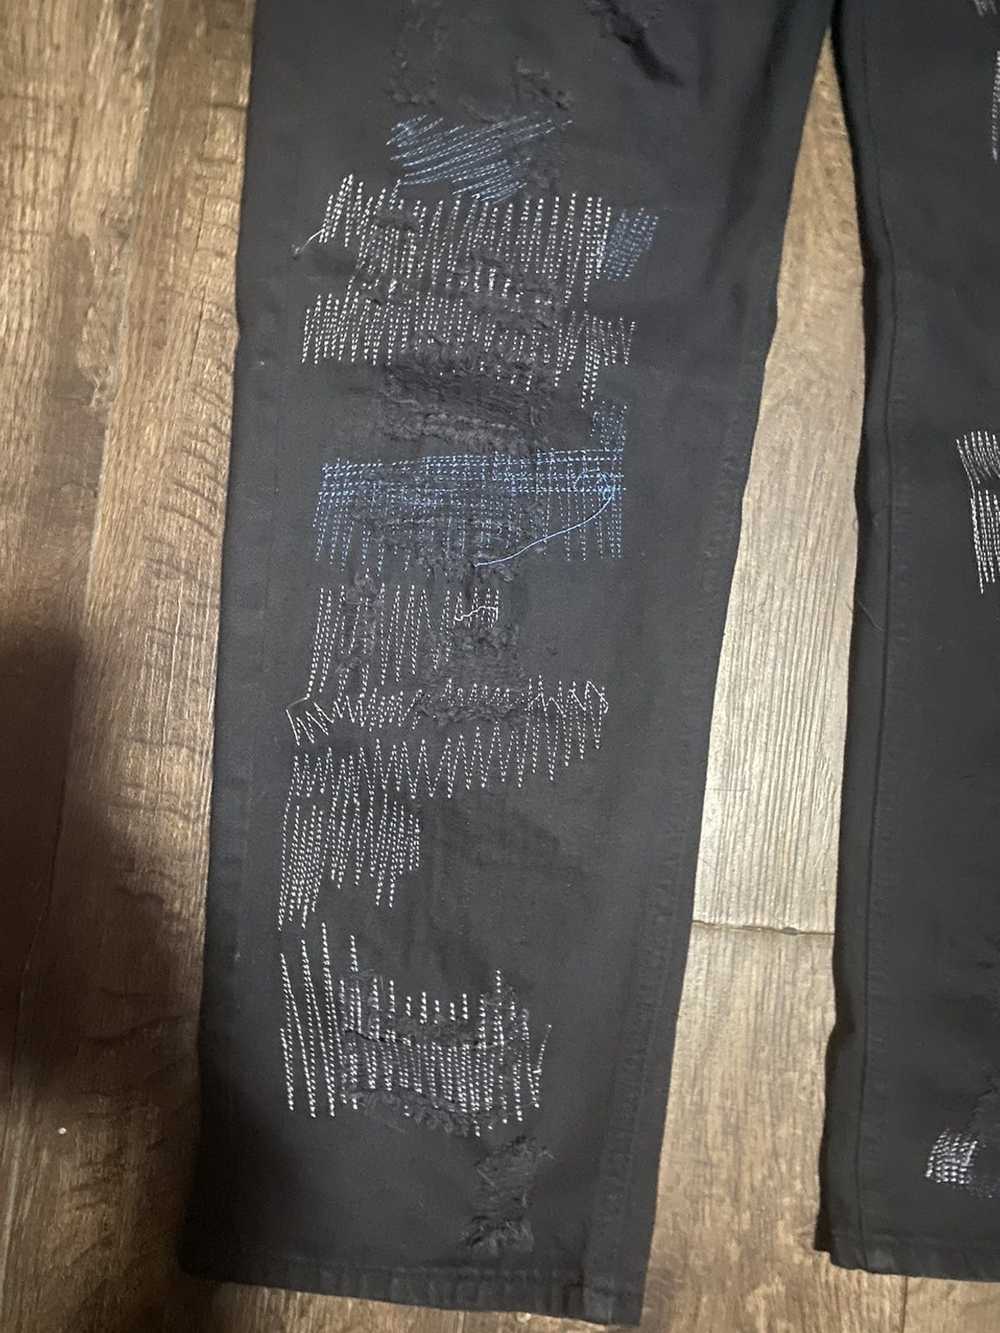 Streetwear Destroyed and repaired jeans - image 2